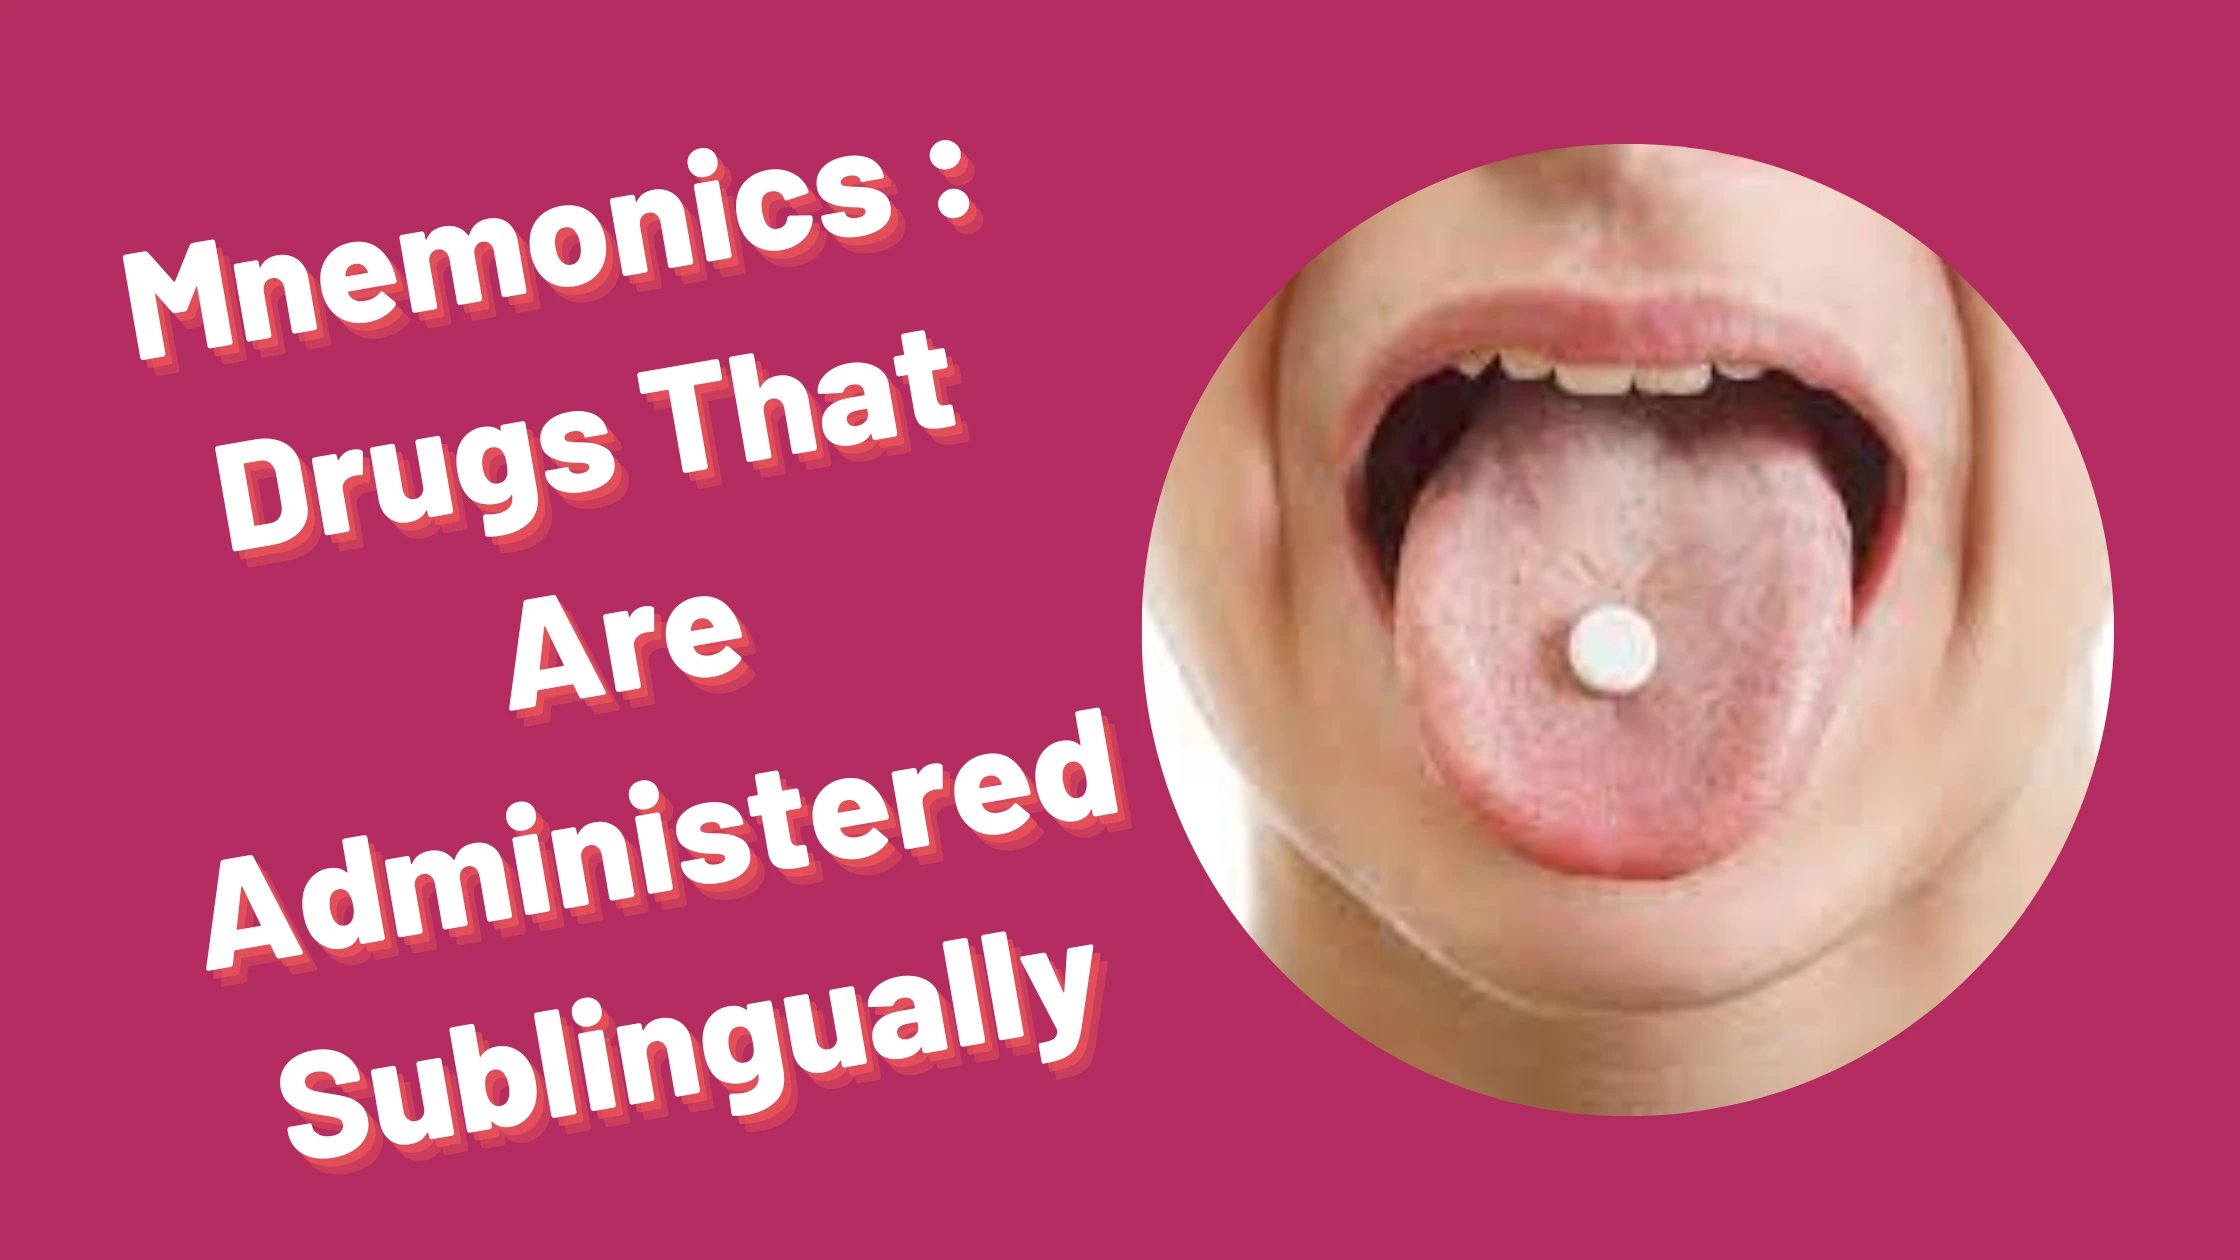 You are currently viewing [Very Cool] Mnemonic : Drugs That Are Administered Sublingually